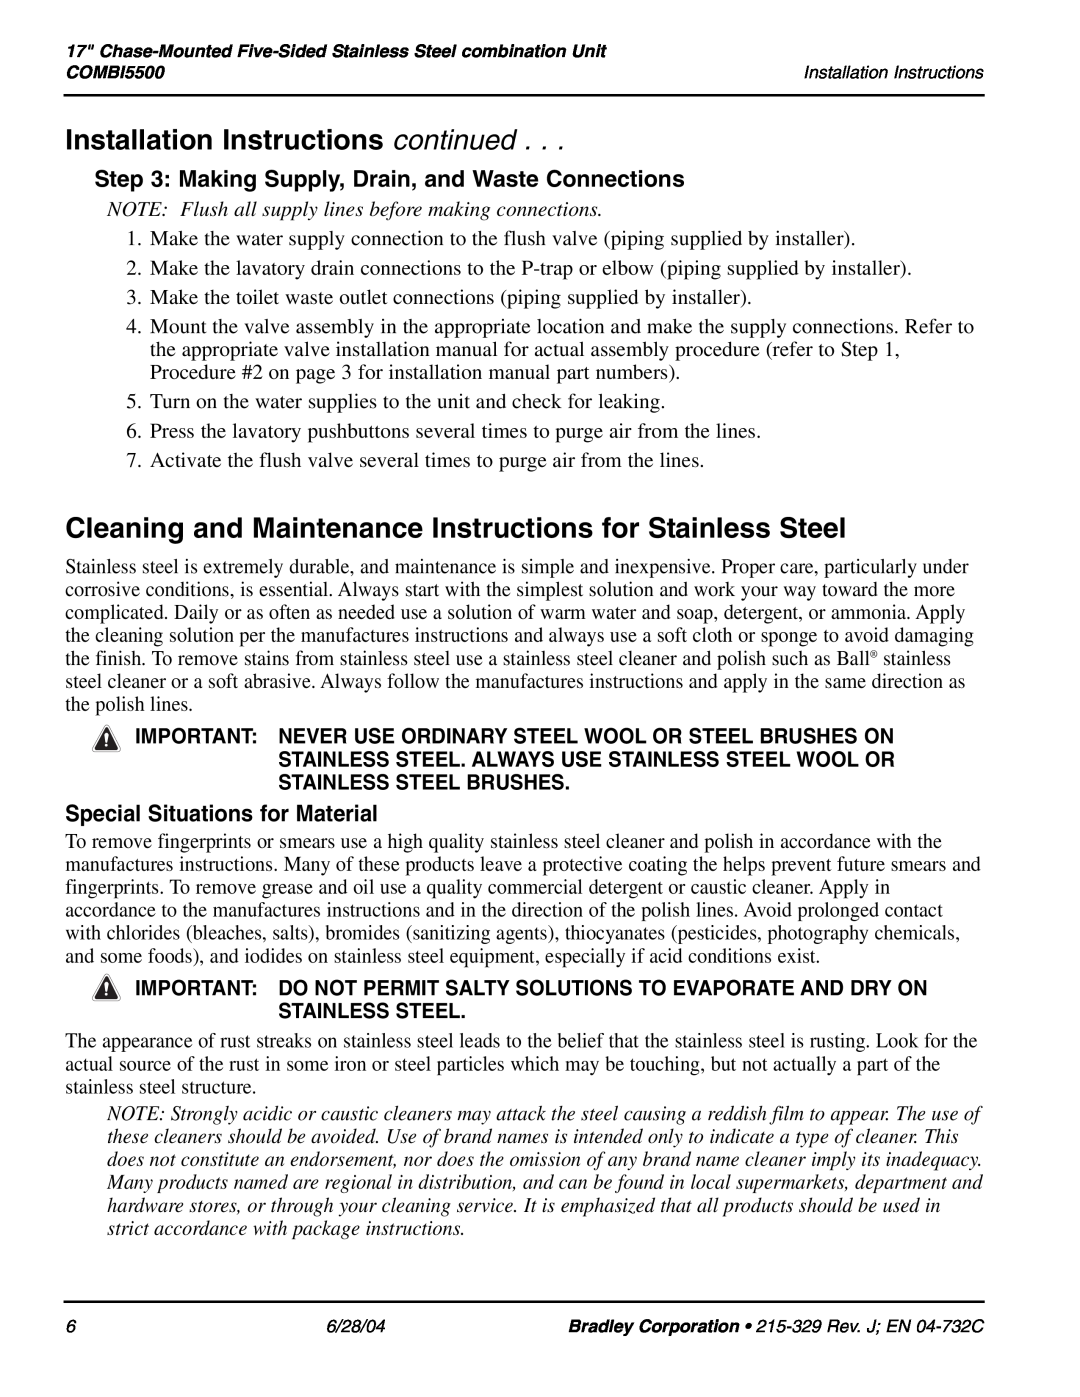 Bradley Brand Furniture COMBI5500 installation instructions Cleaning and Maintenance Instructions for Stainless Steel 